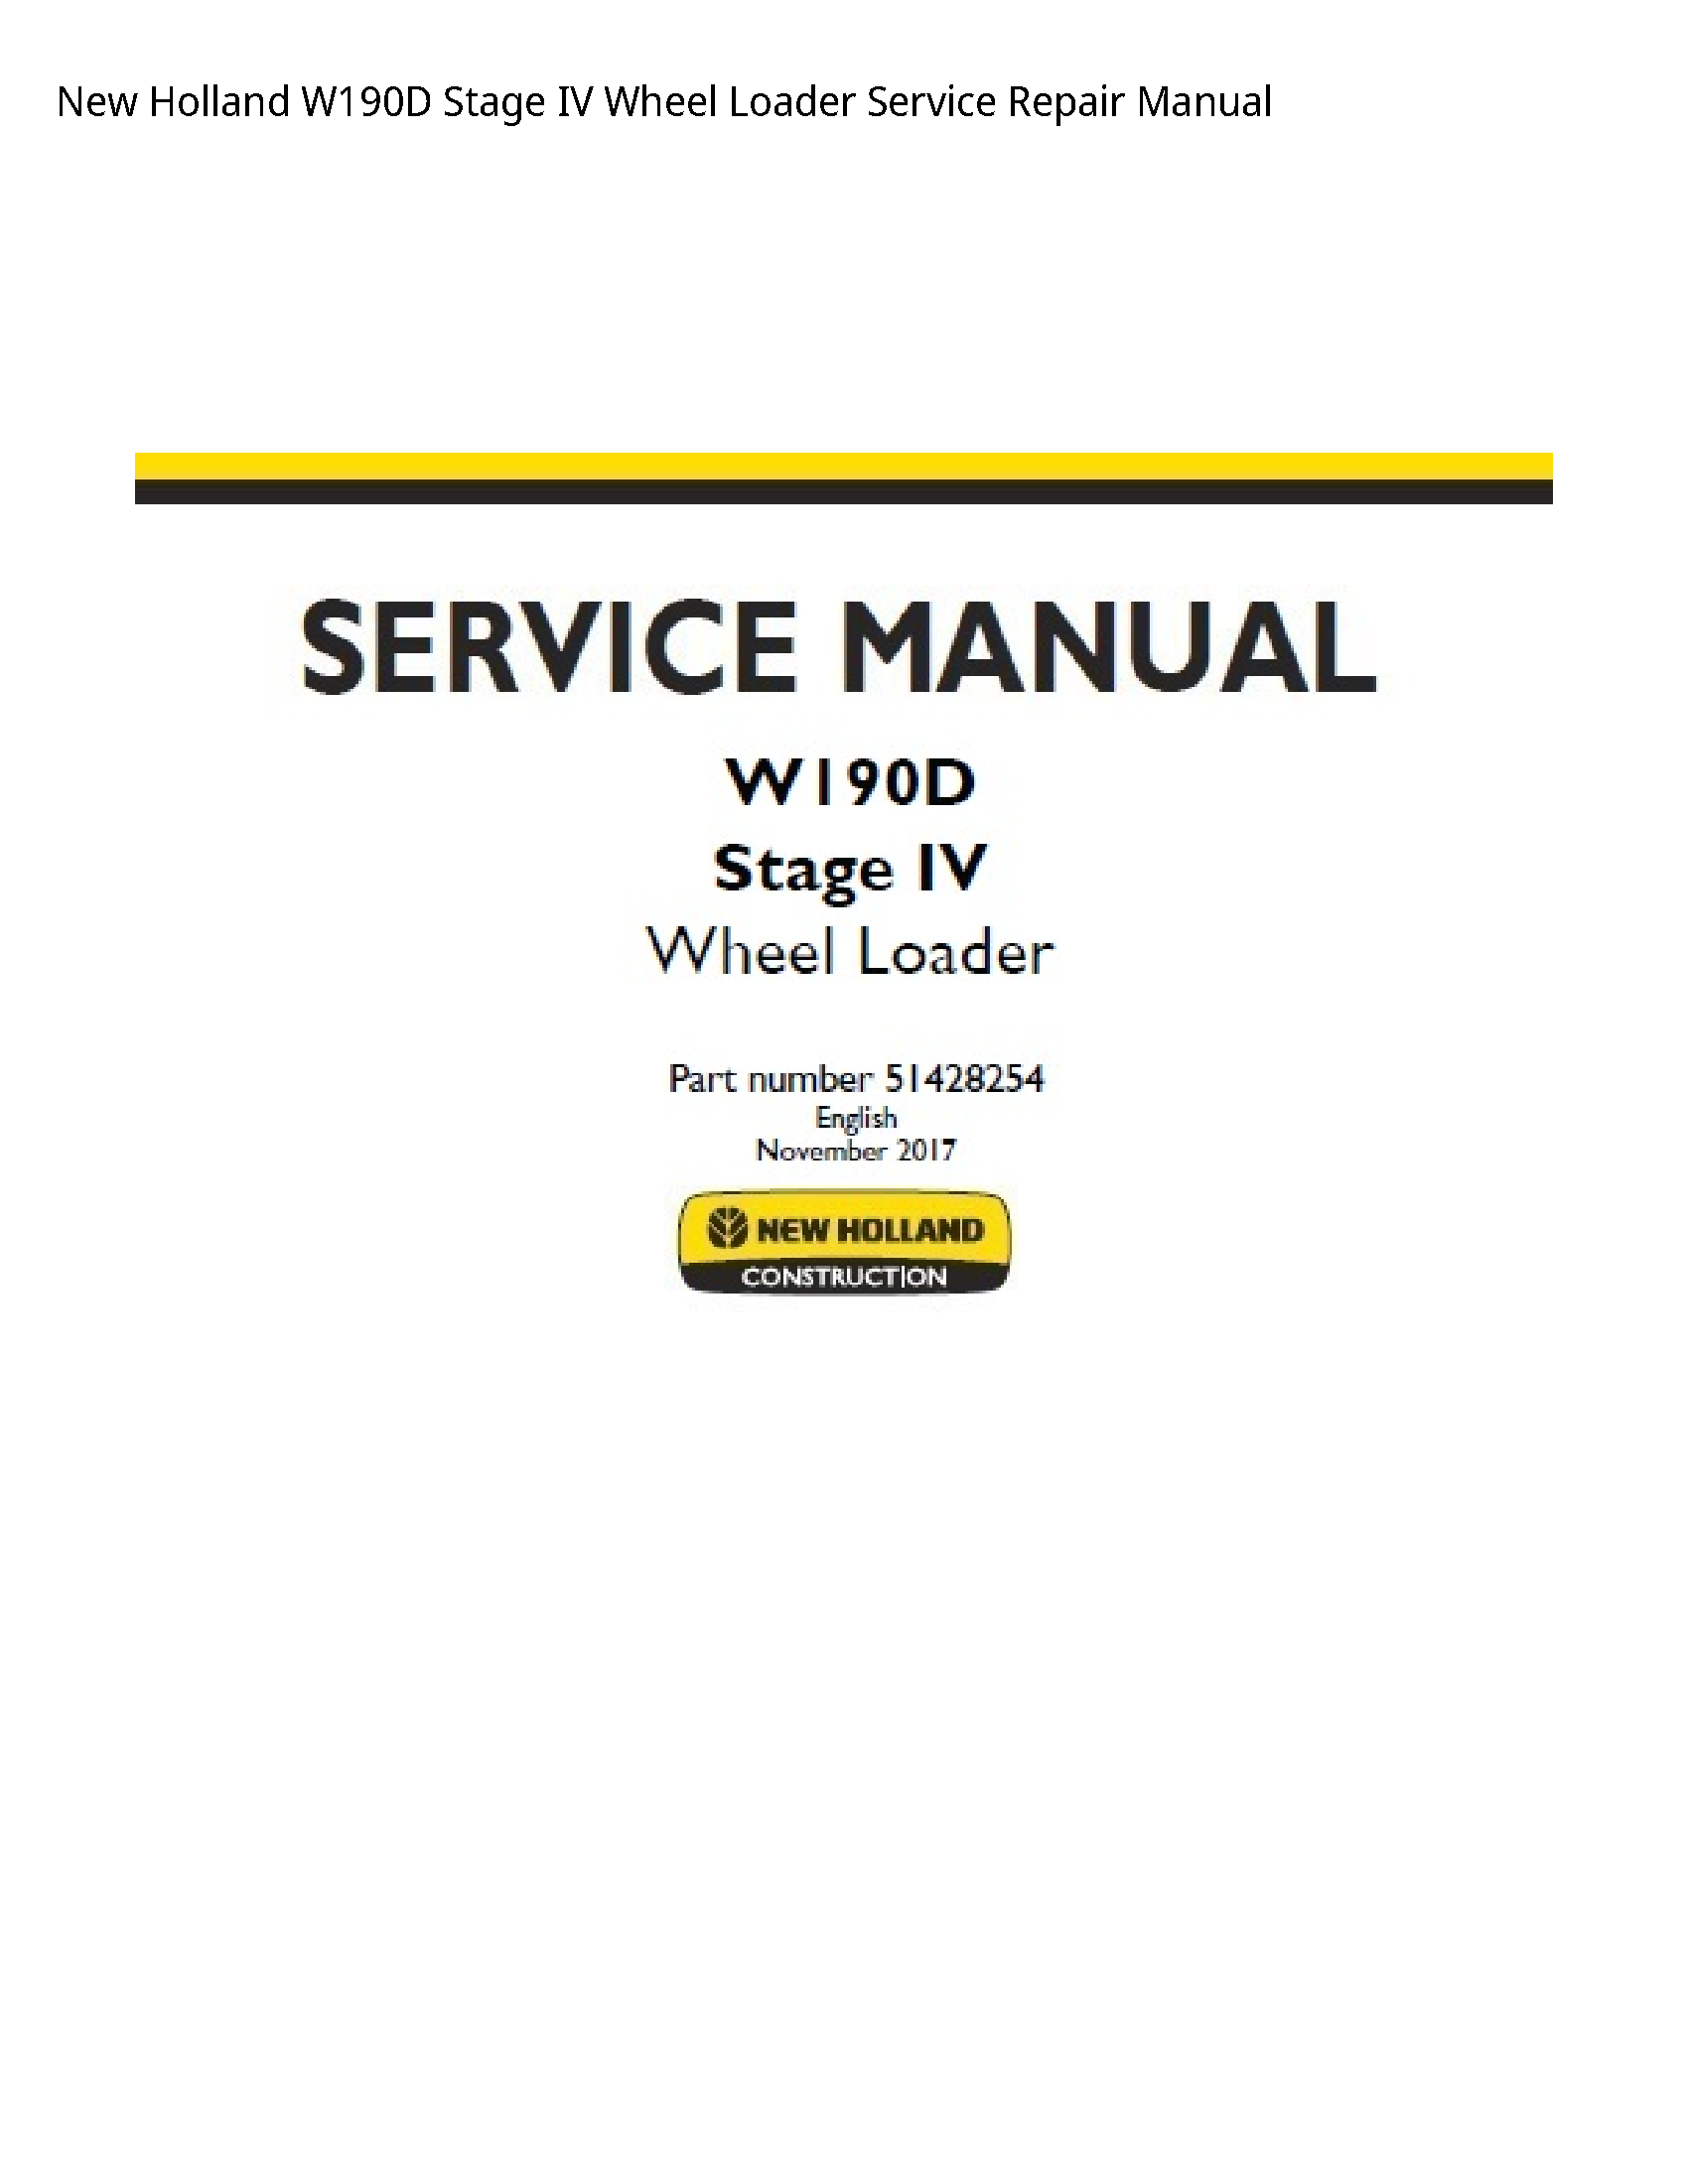 New Holland W190D Stage IV Wheel Loader manual